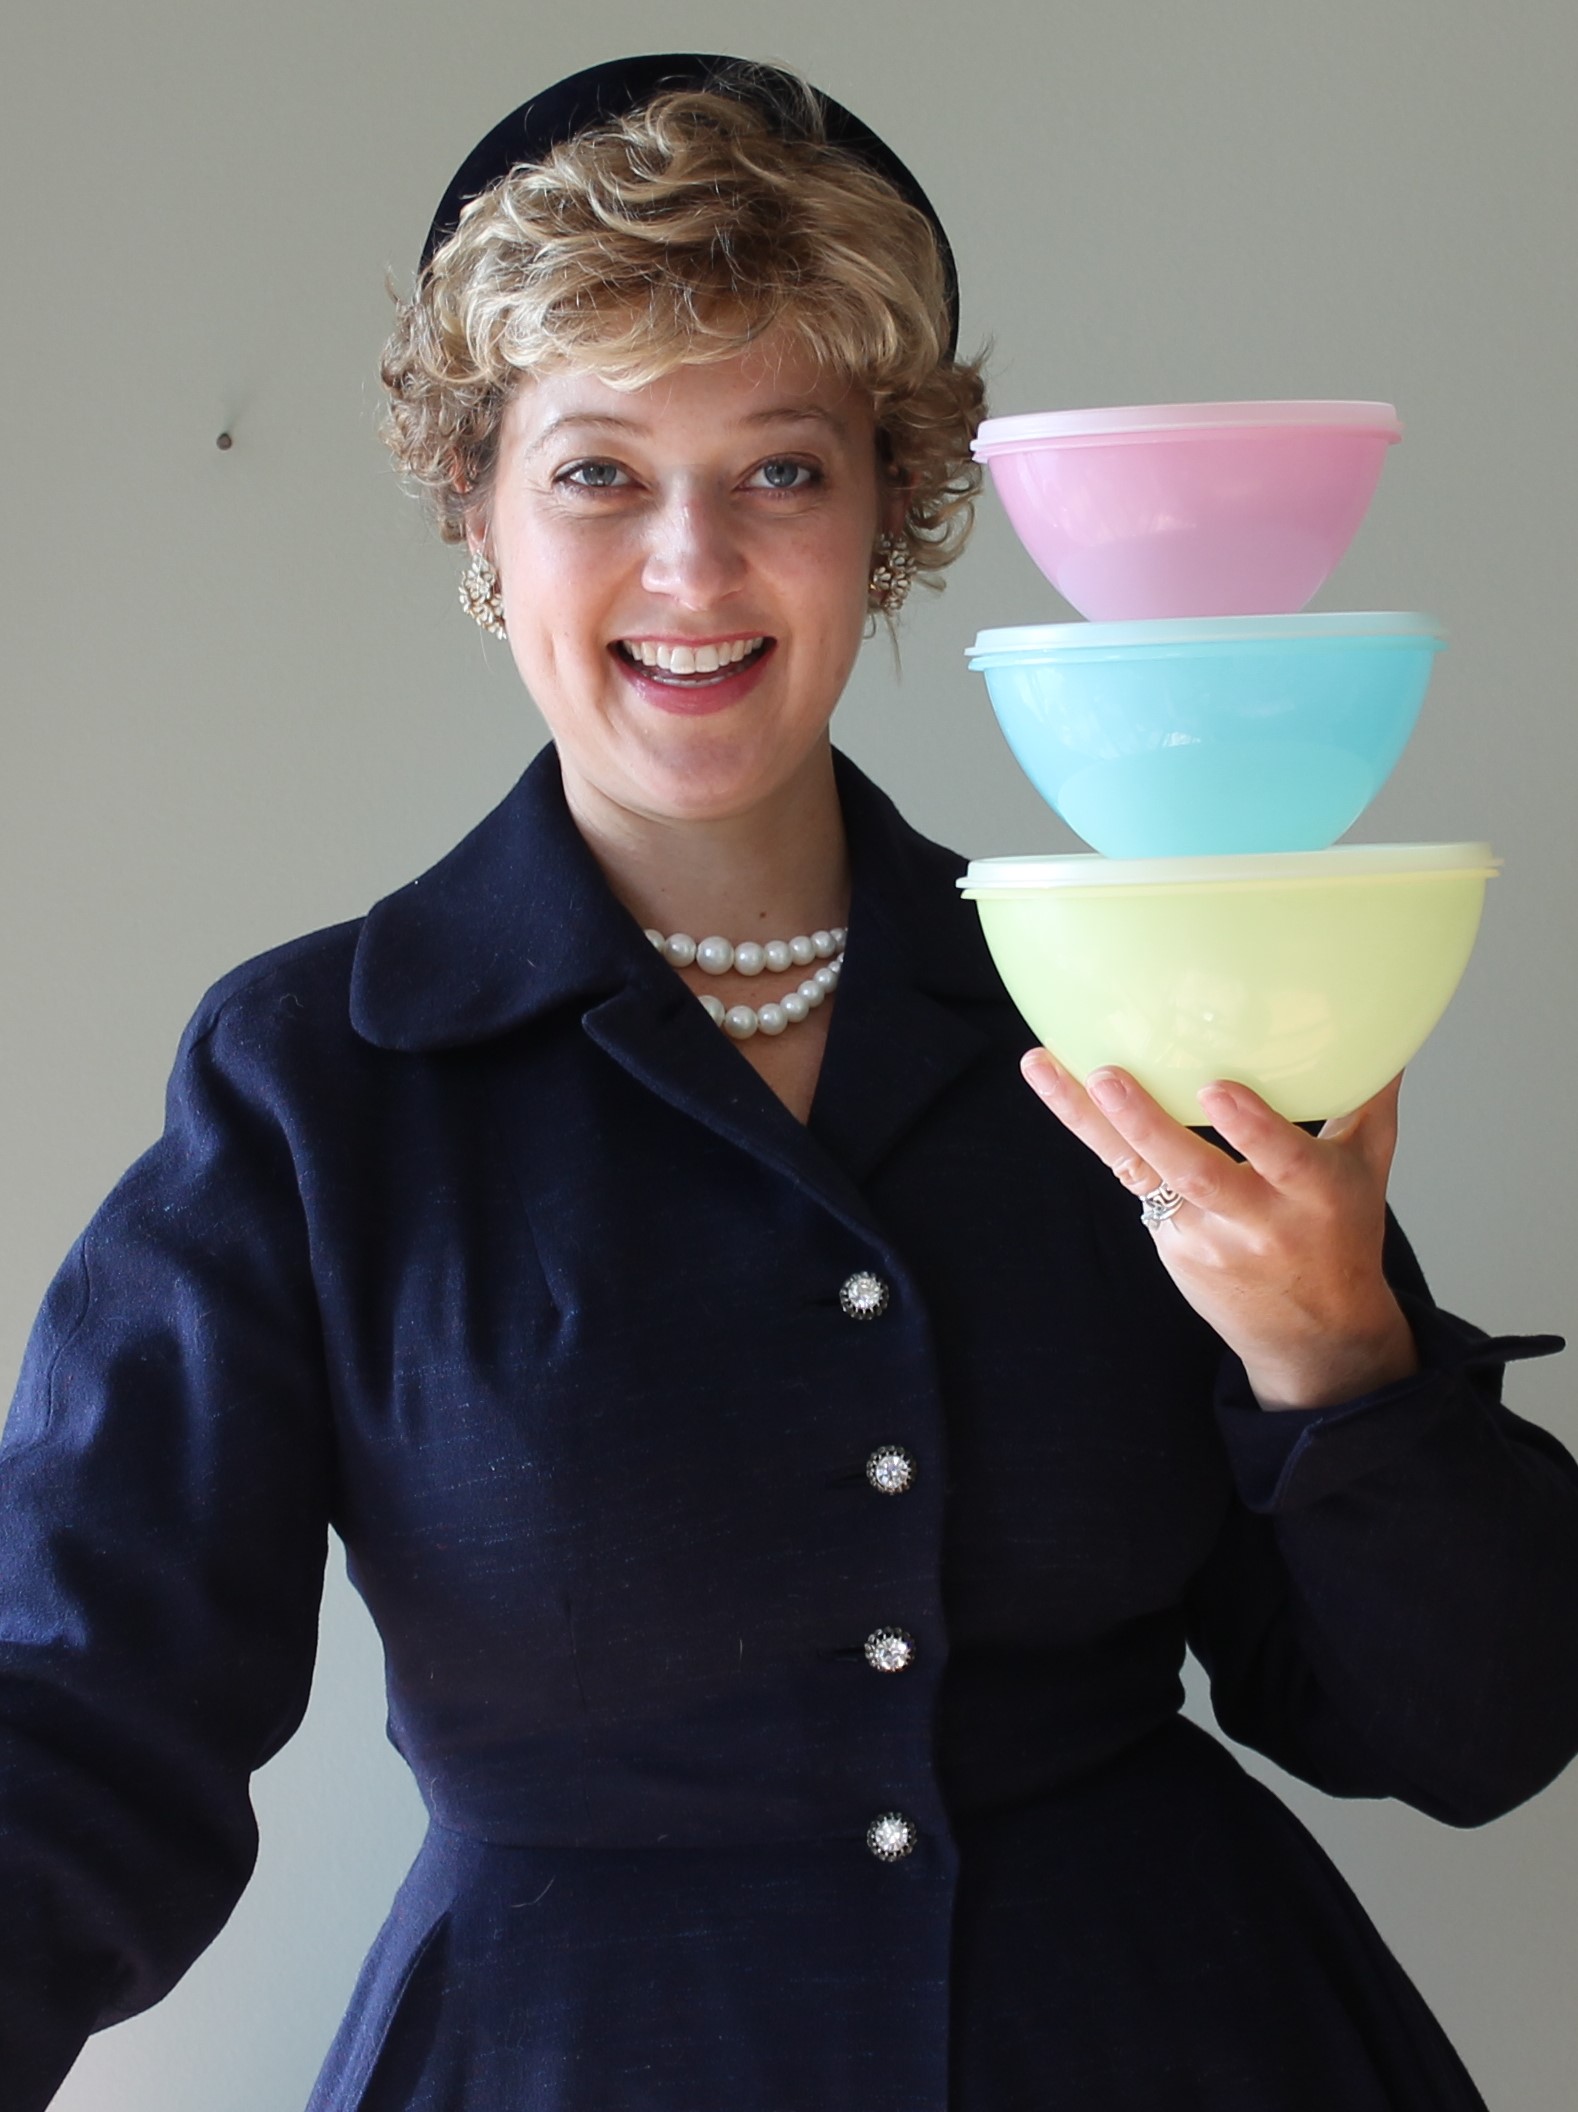 Picture of Leslie Goddard in character as Brownie Wise holding three Tupperware containers